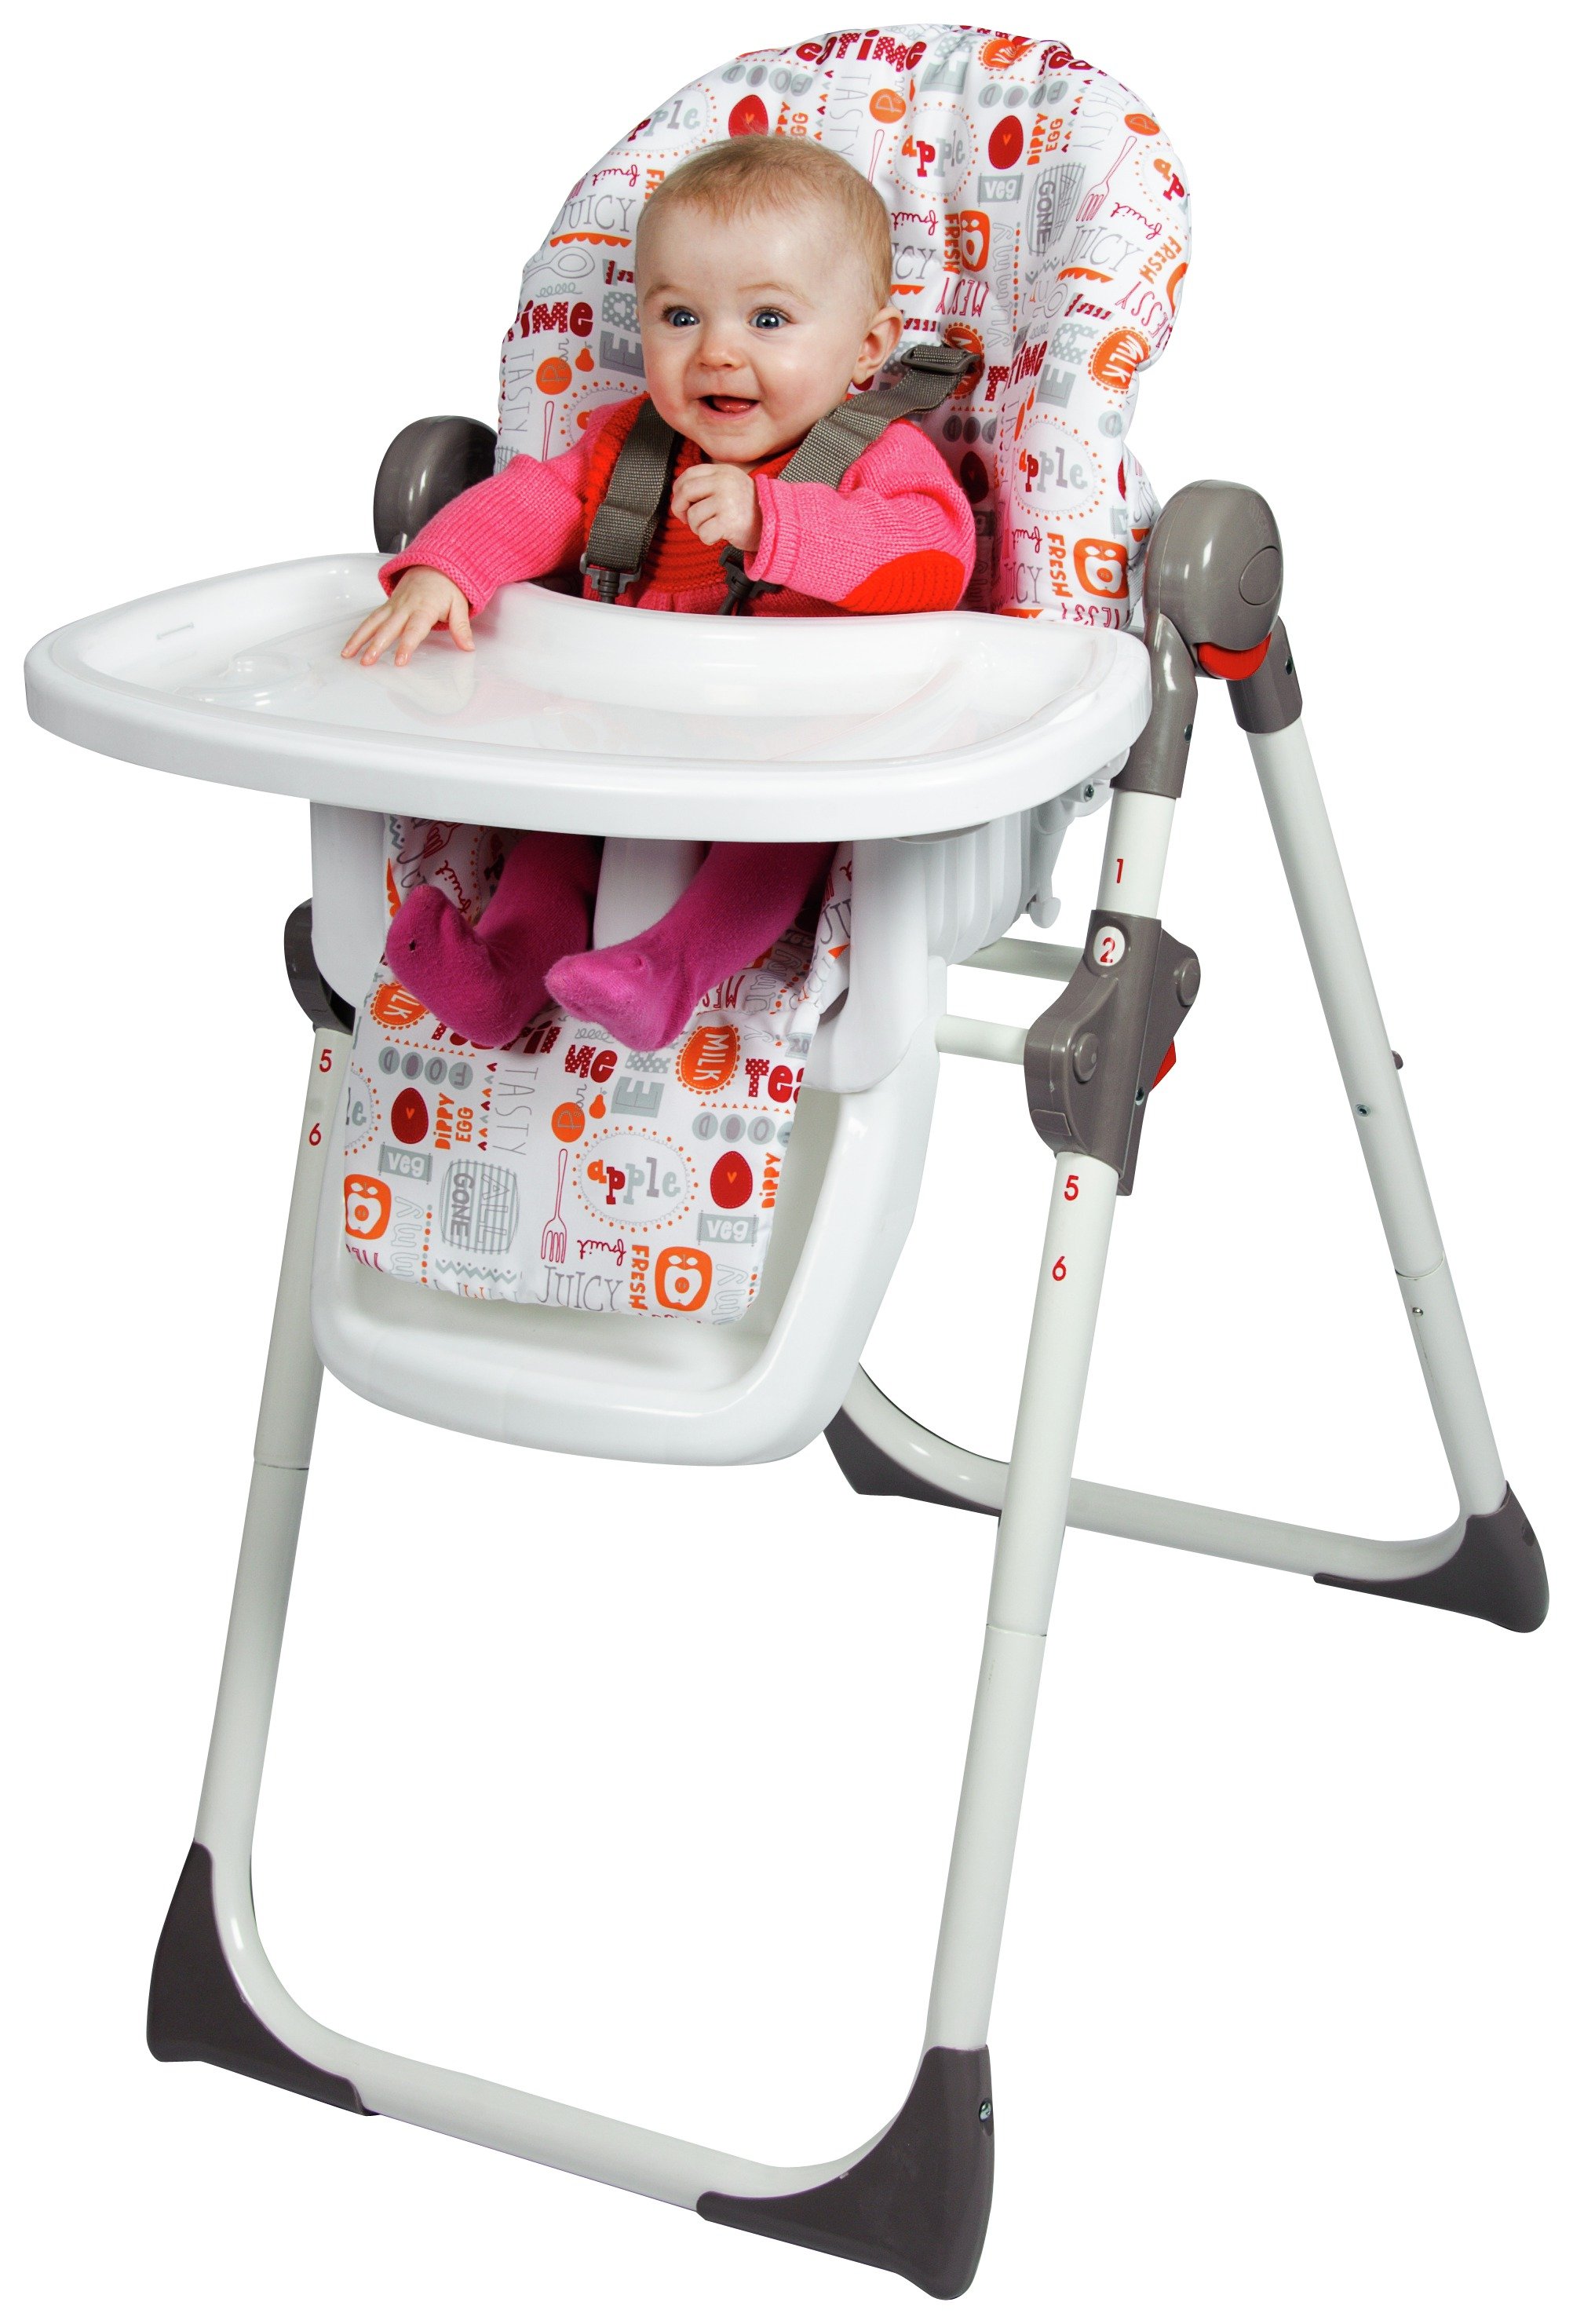 Red Kite Feed Me Deli Highchair